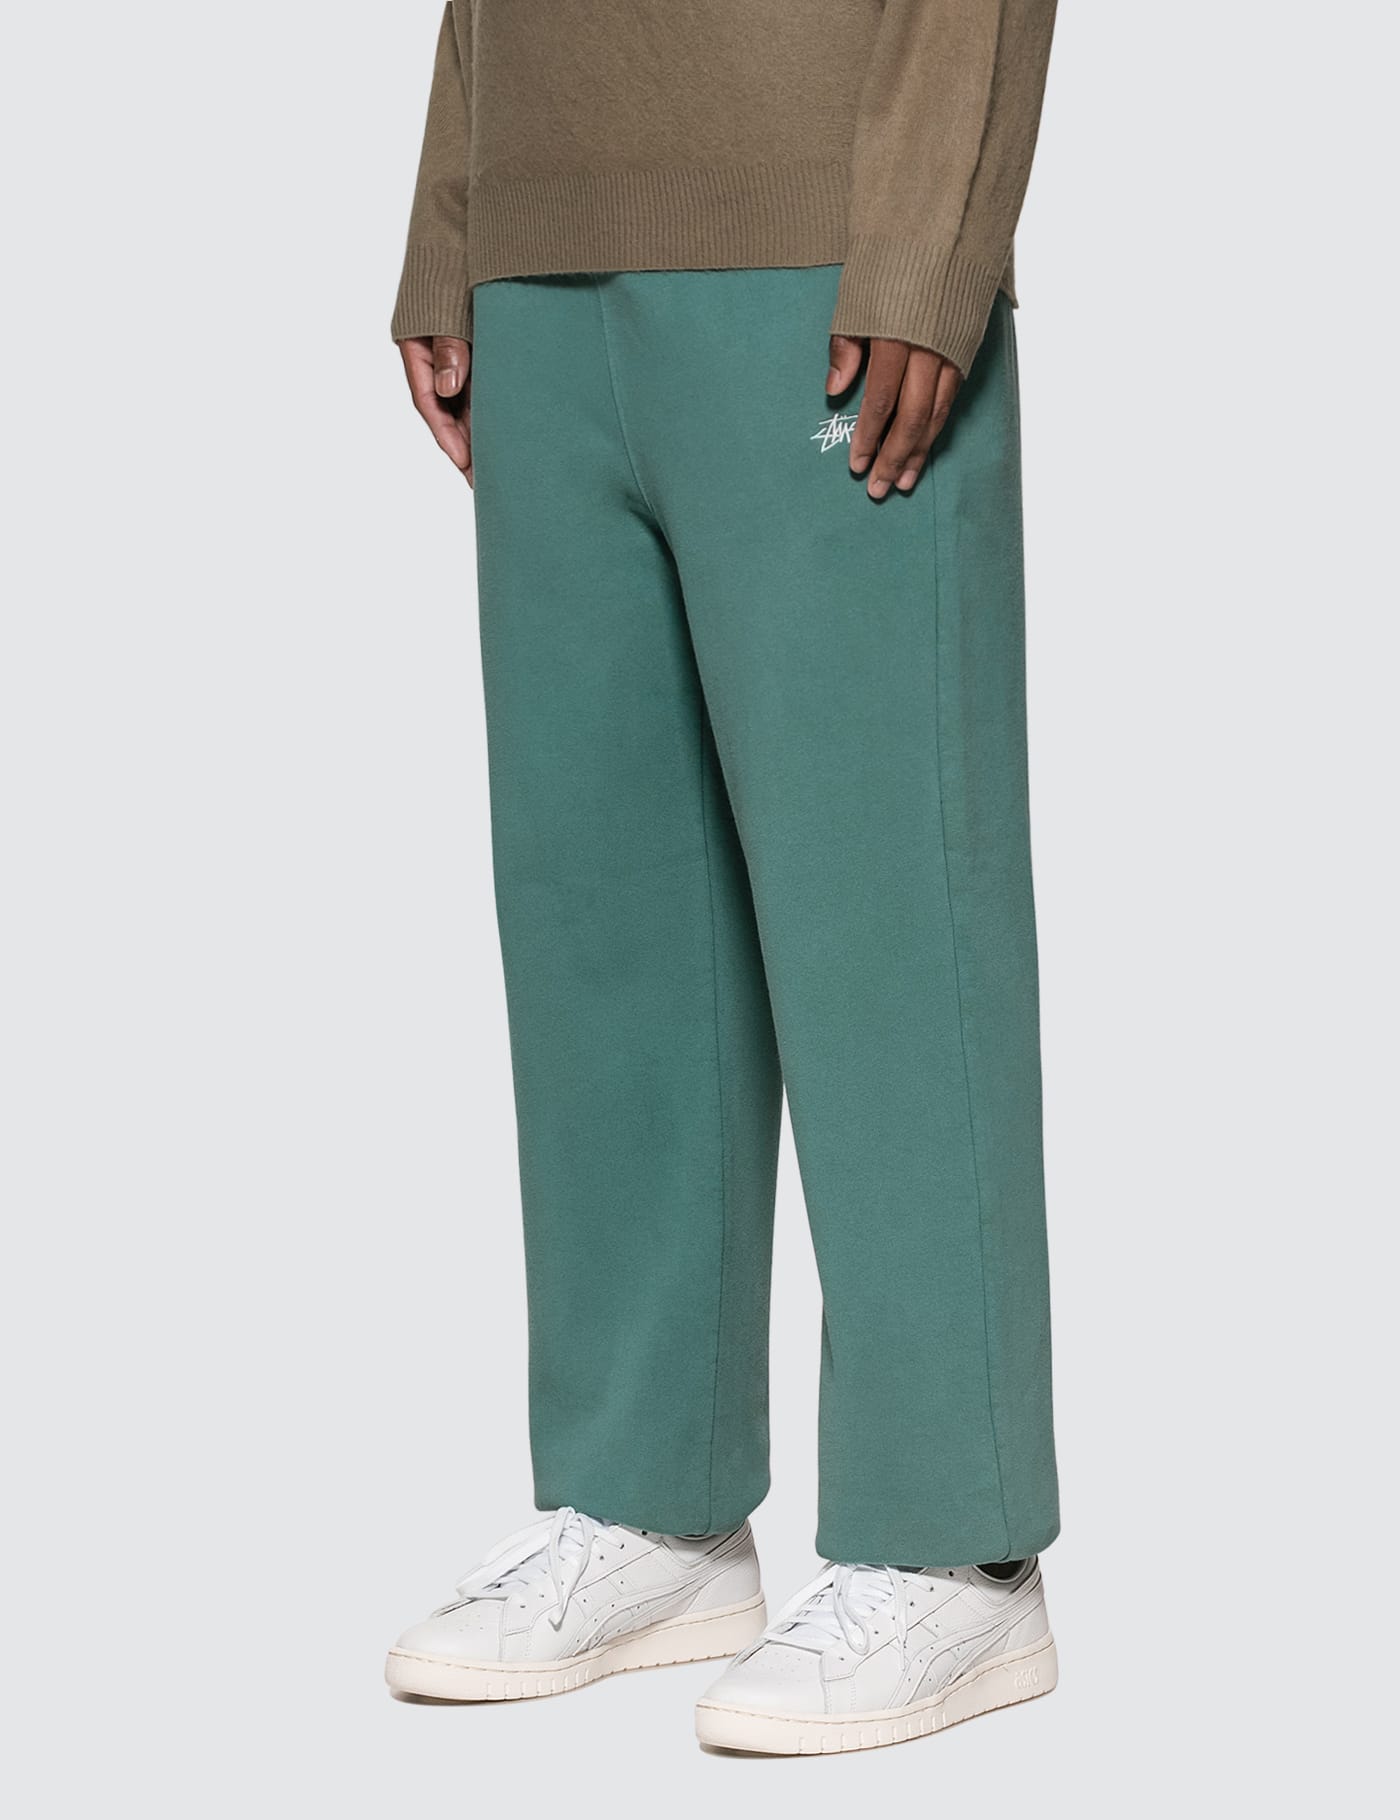 Stüssy - Stock Logo Pants | HBX - Globally Curated Fashion and 